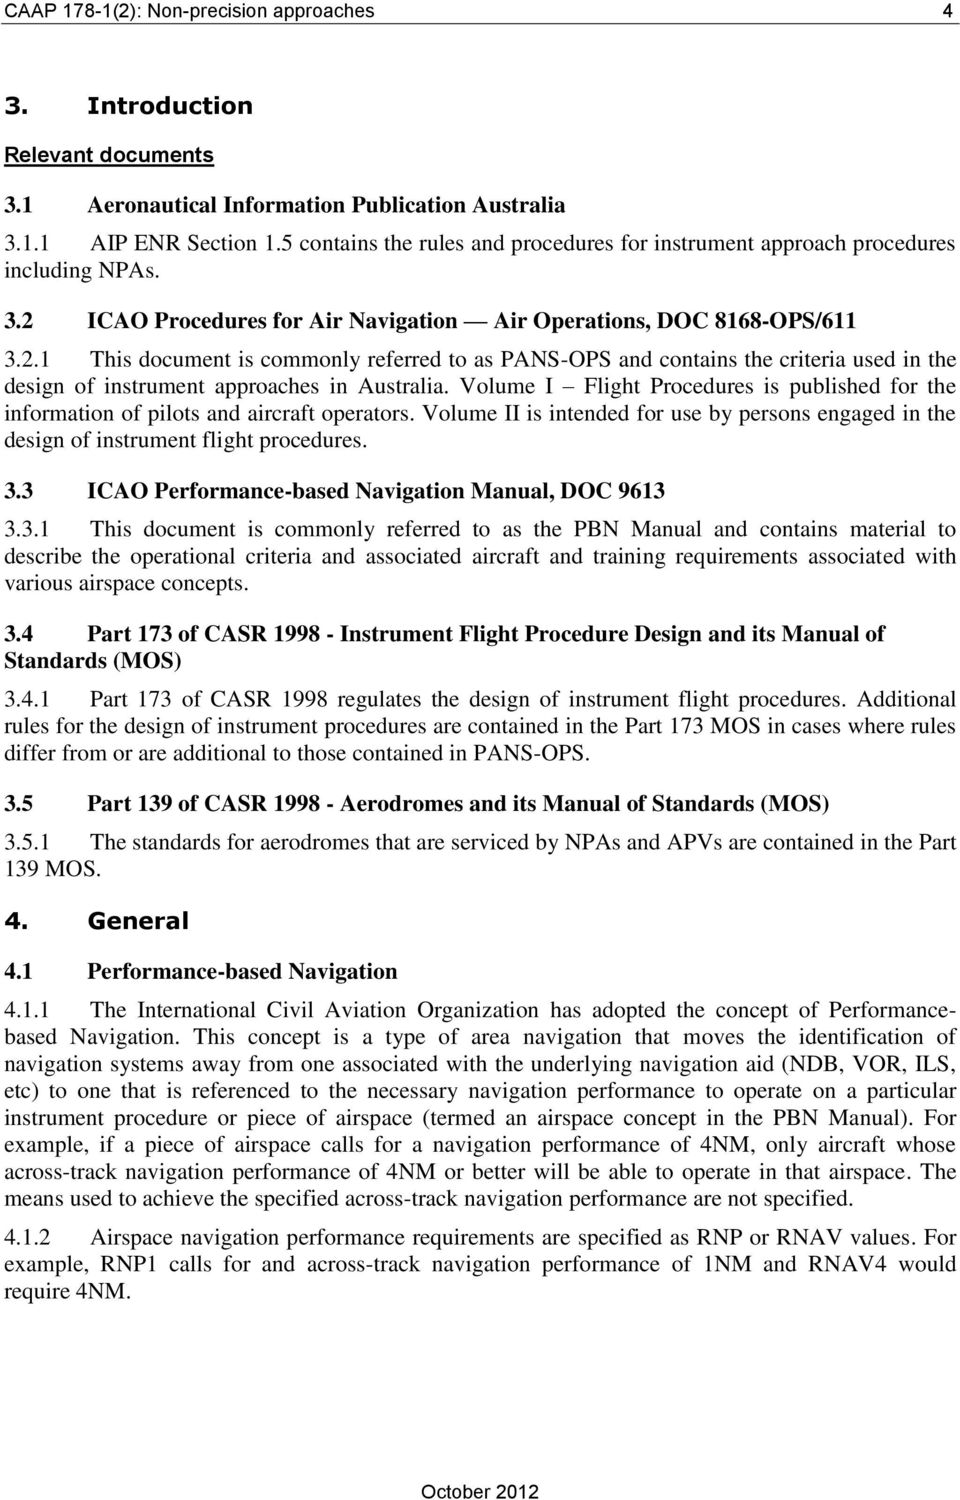 ICAO Procedures for Air Navigation Air Operations, DOC 8168-OPS/611 3.2.